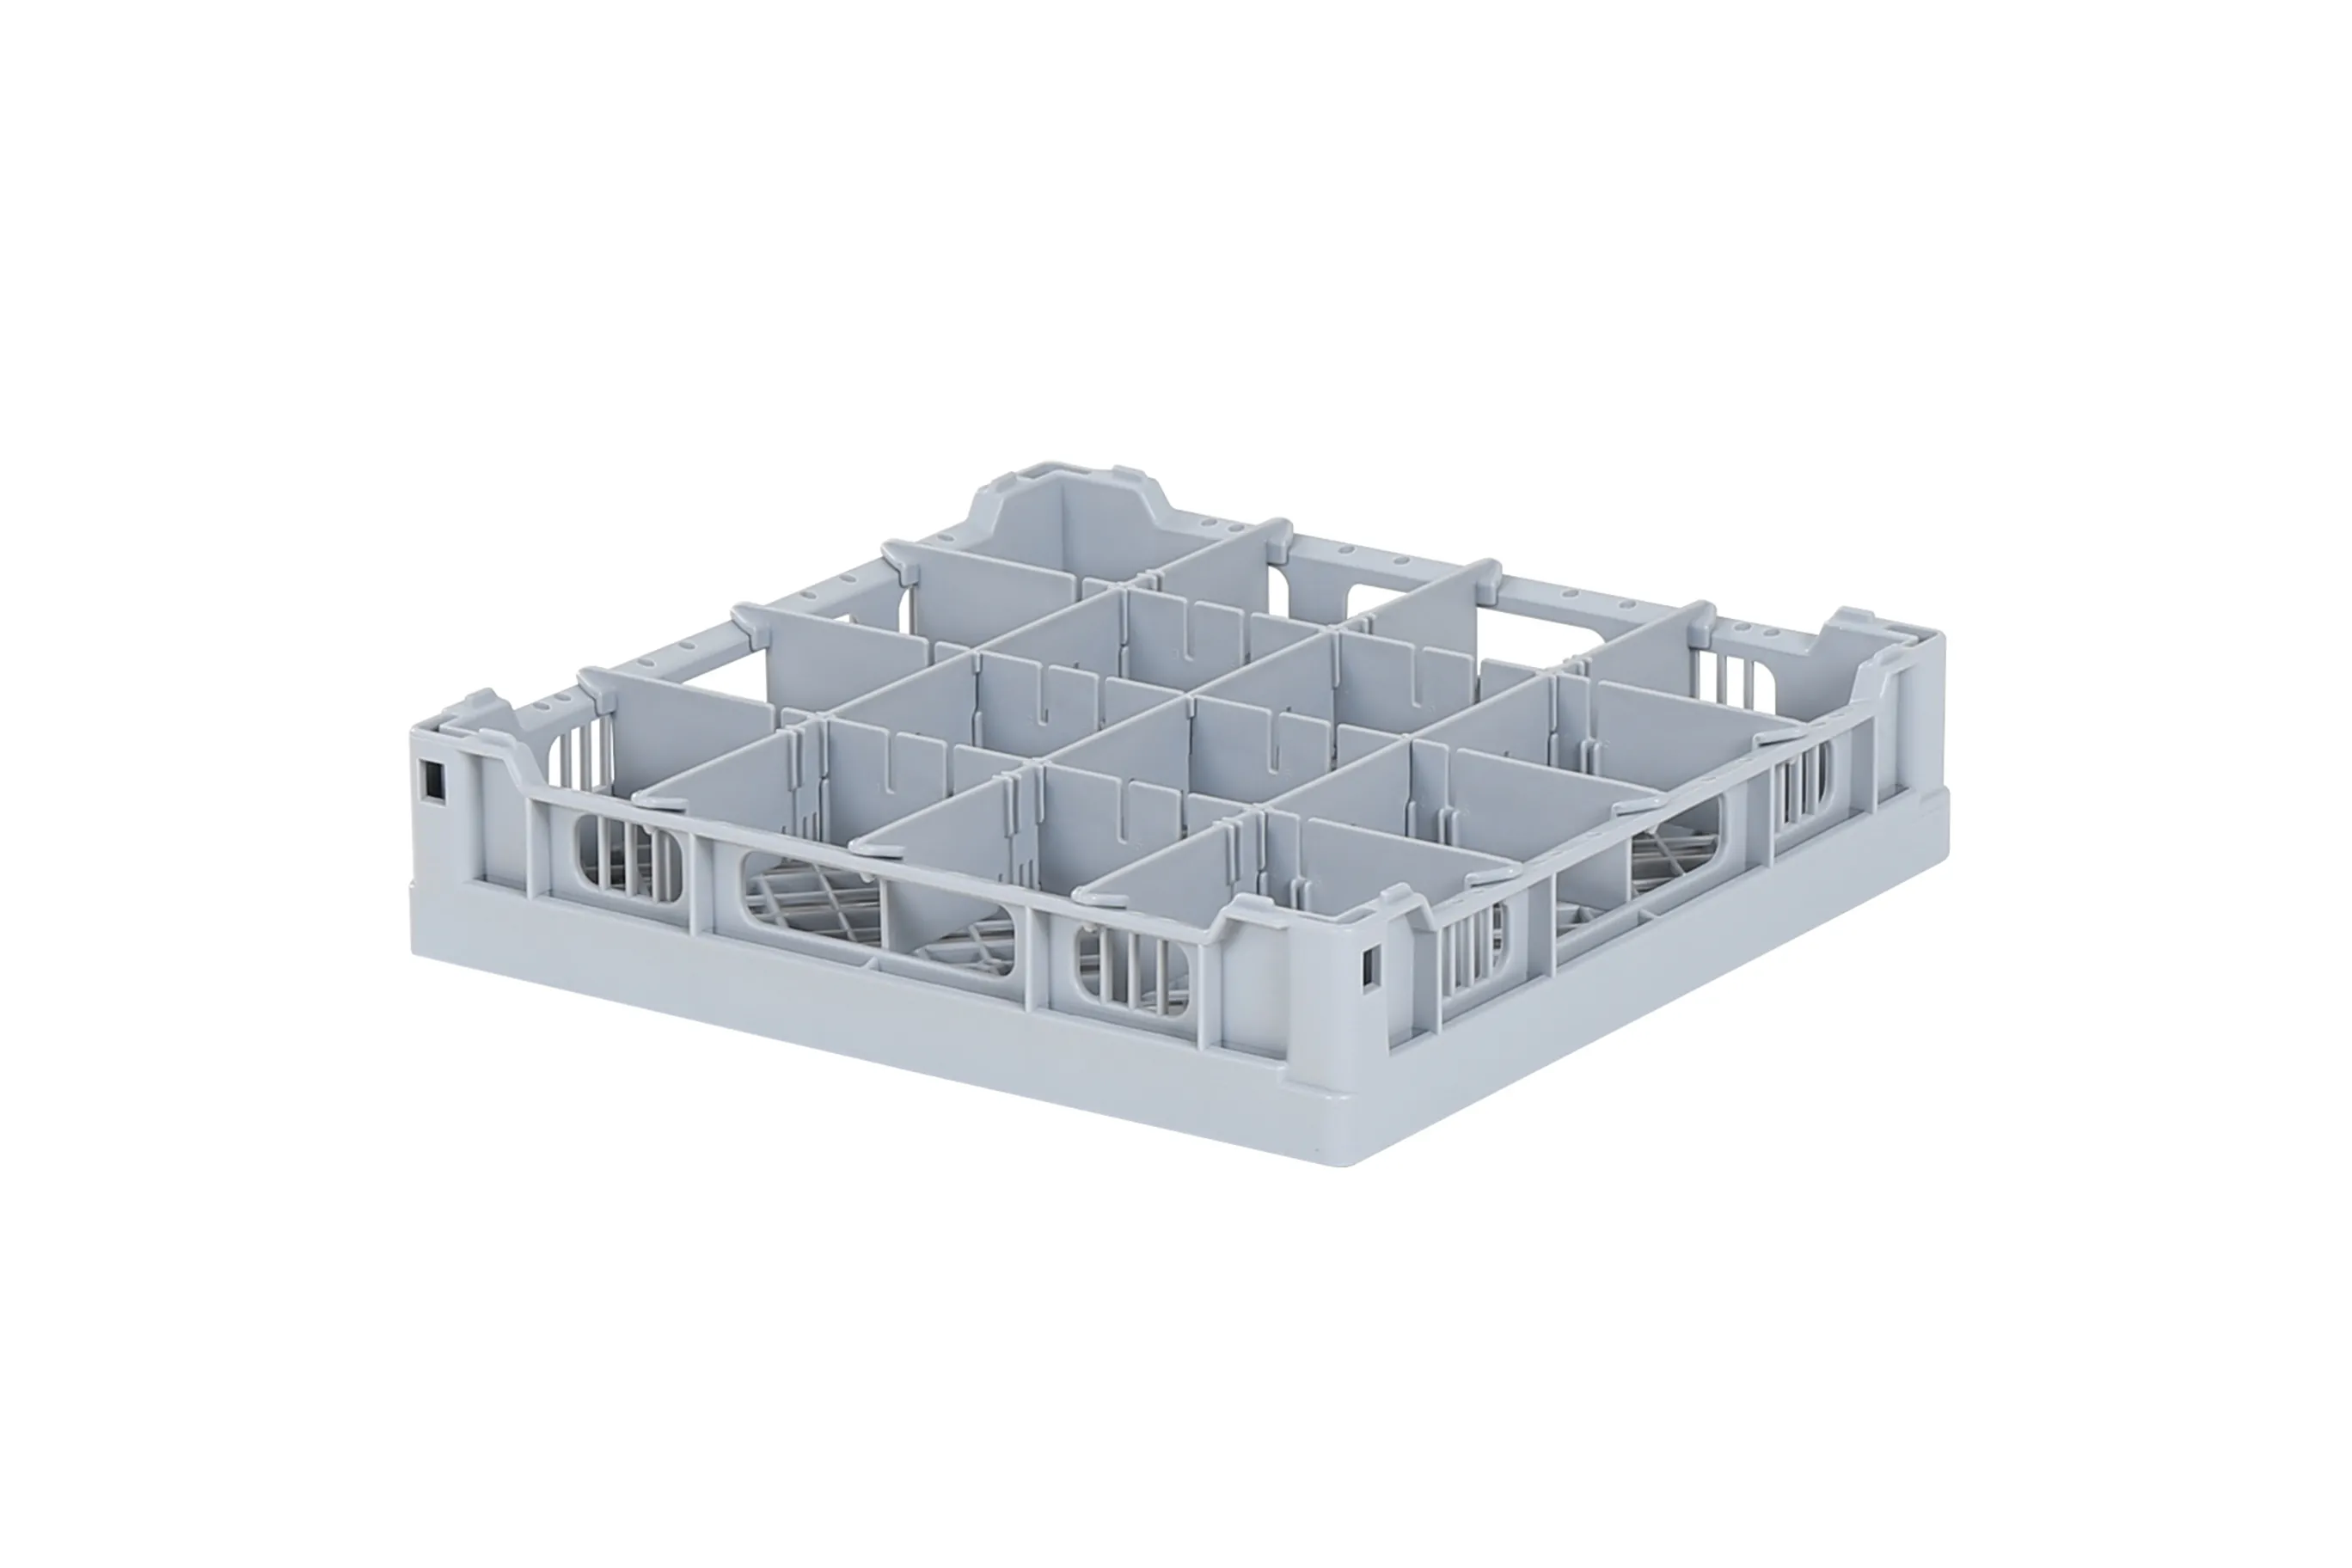 Dishwasher basket 400 x 400 mm - maximum glass height 65 mm - with 4 x 4 compartment division - maximum Ø of glass 88mm